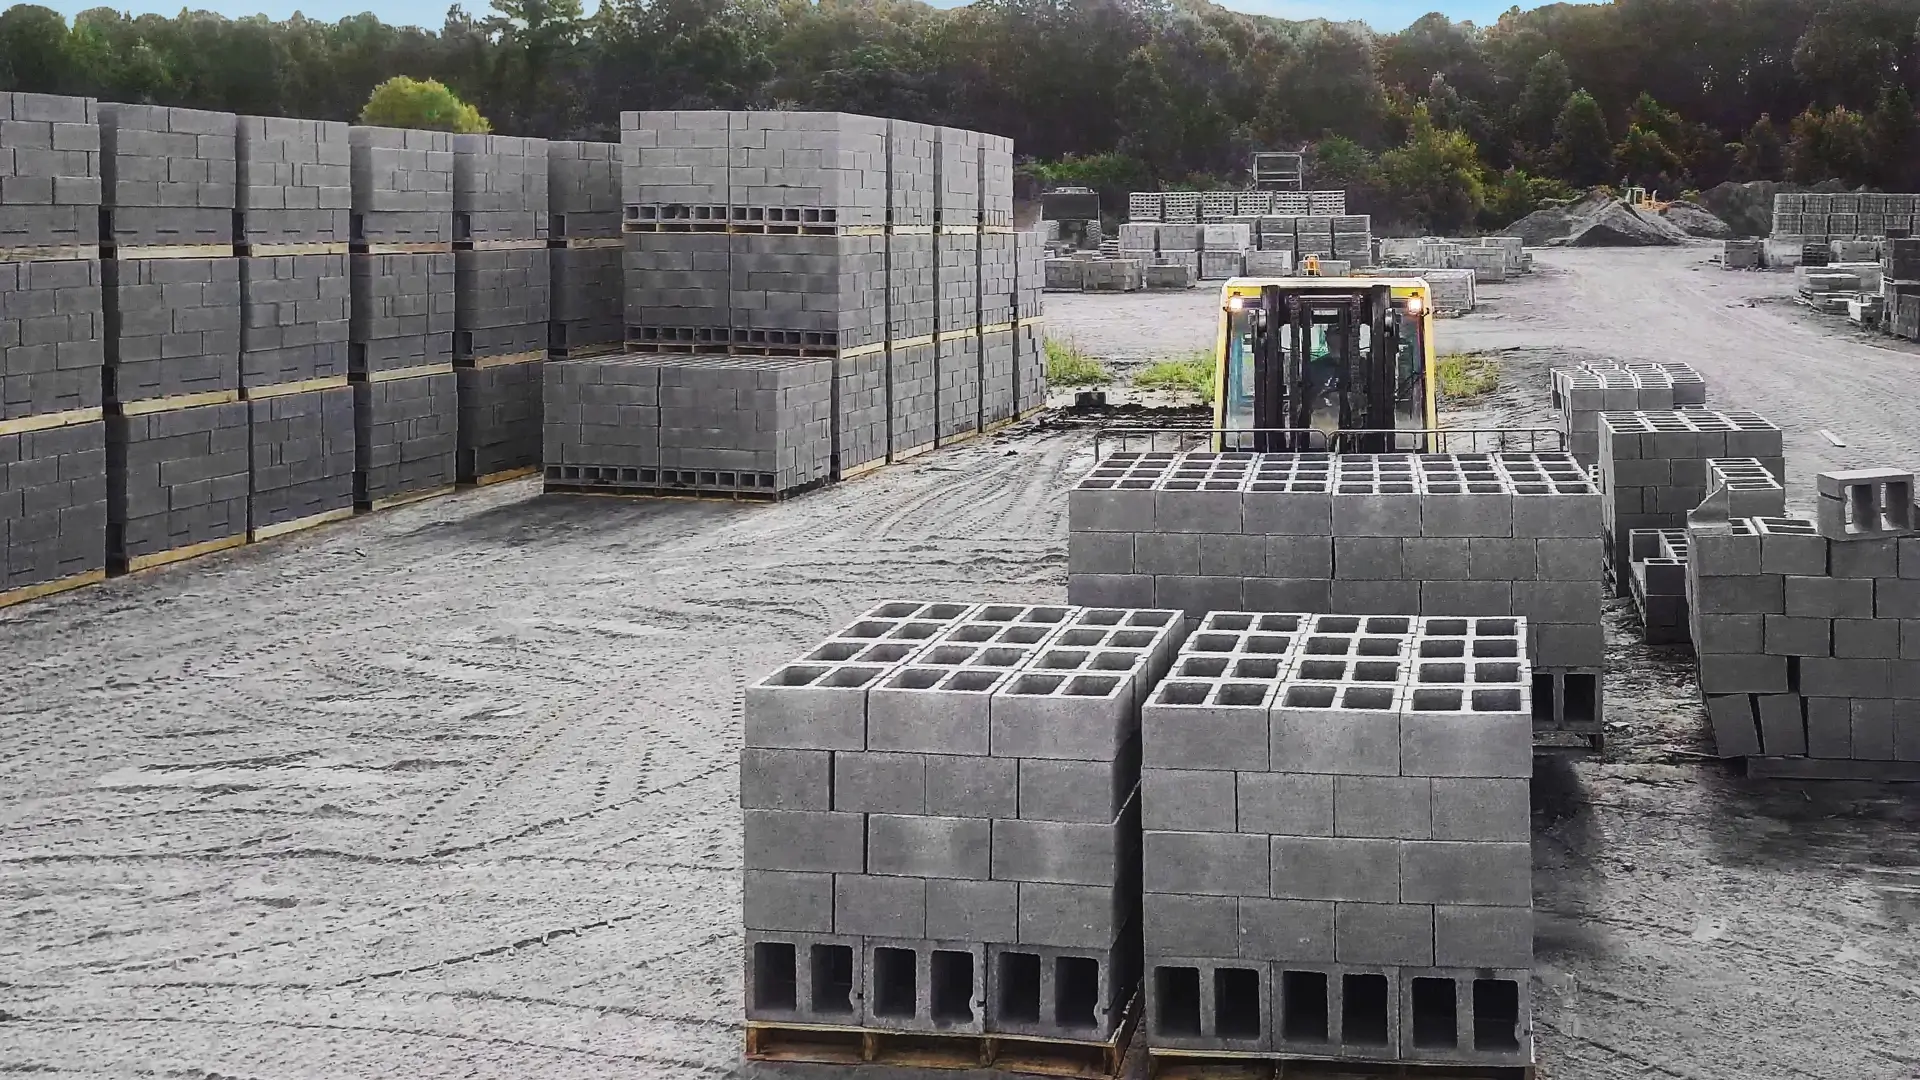 Ultra-low carbon concrete blocks are lined up in stacks at Blair Block in Childersburg, Alabama, awaiting customer delivery.Photographer: Mark Scantlebury for CarbonBuilt